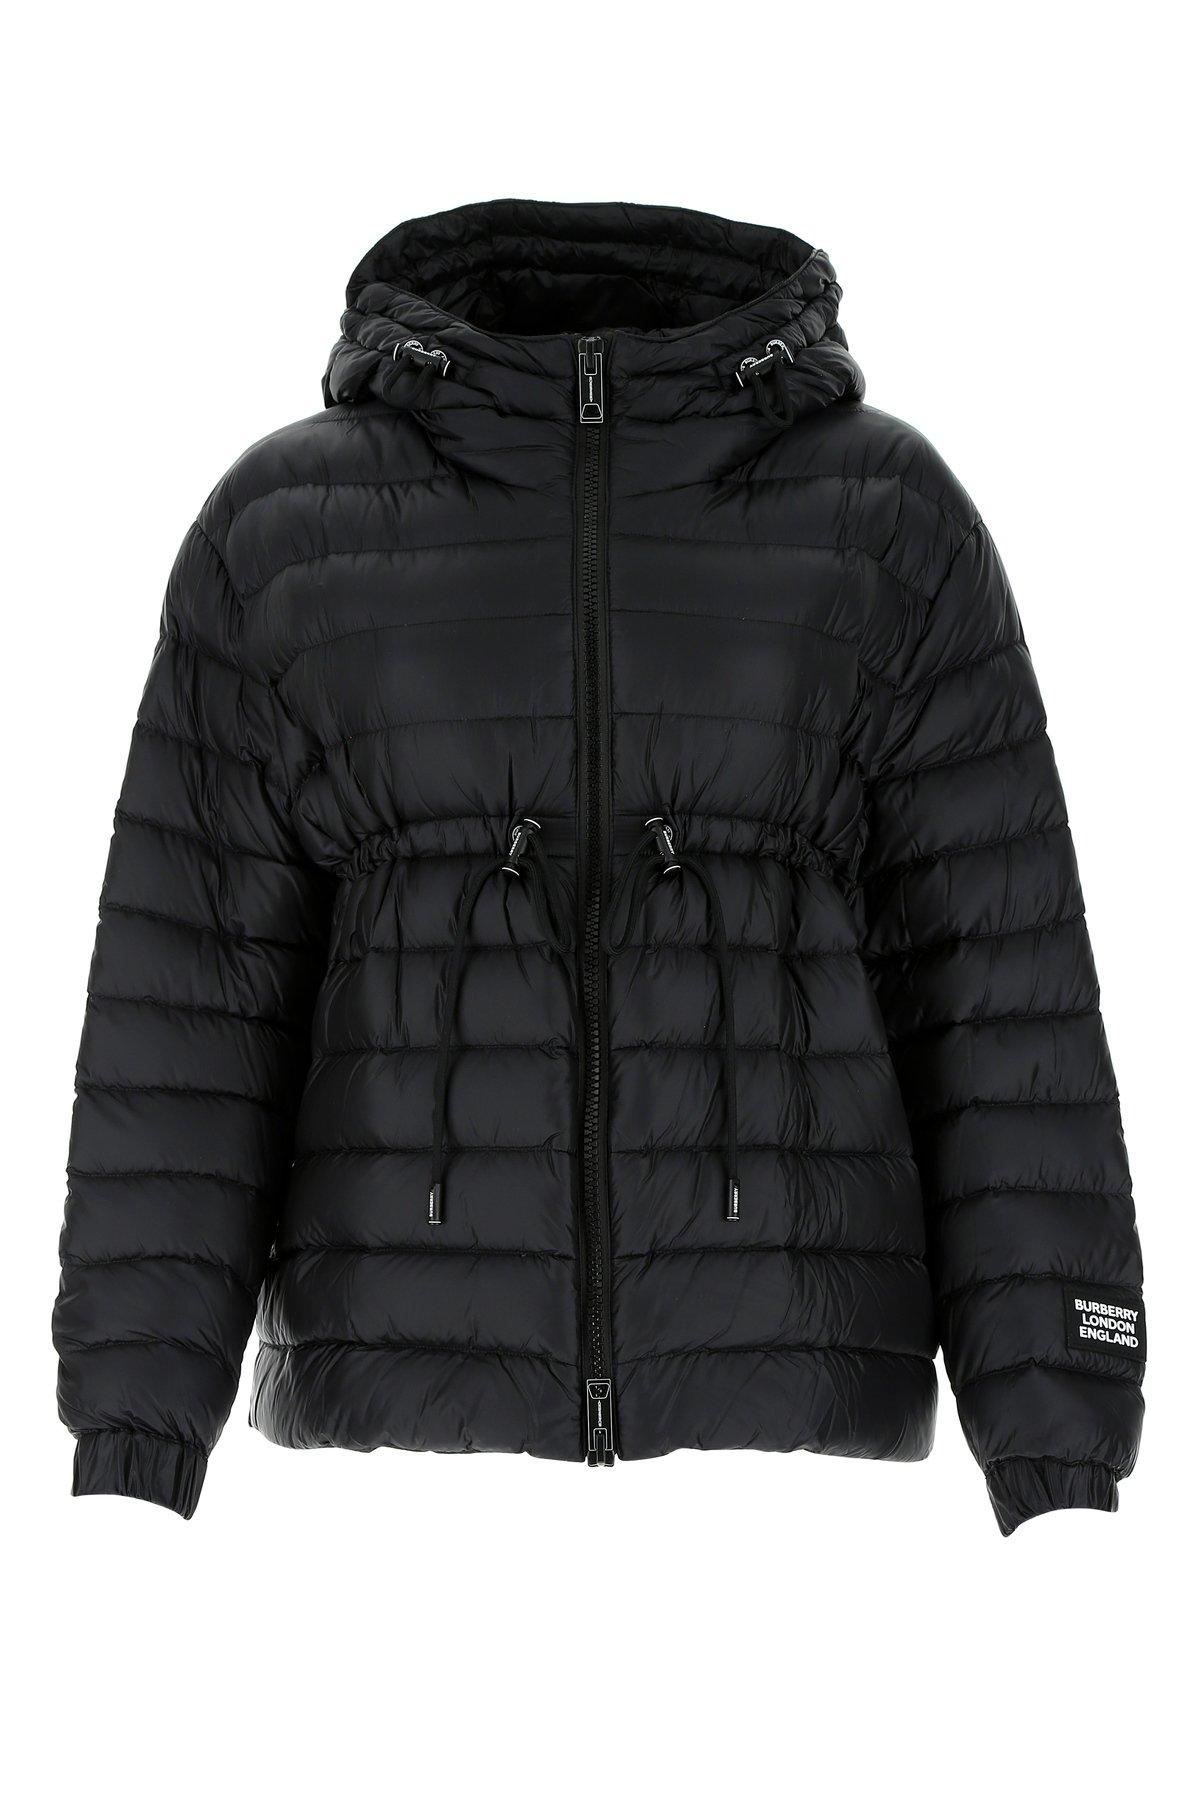 Burberry Synthetic Hooded Drawstring Puffer Jacket in Black - Lyst